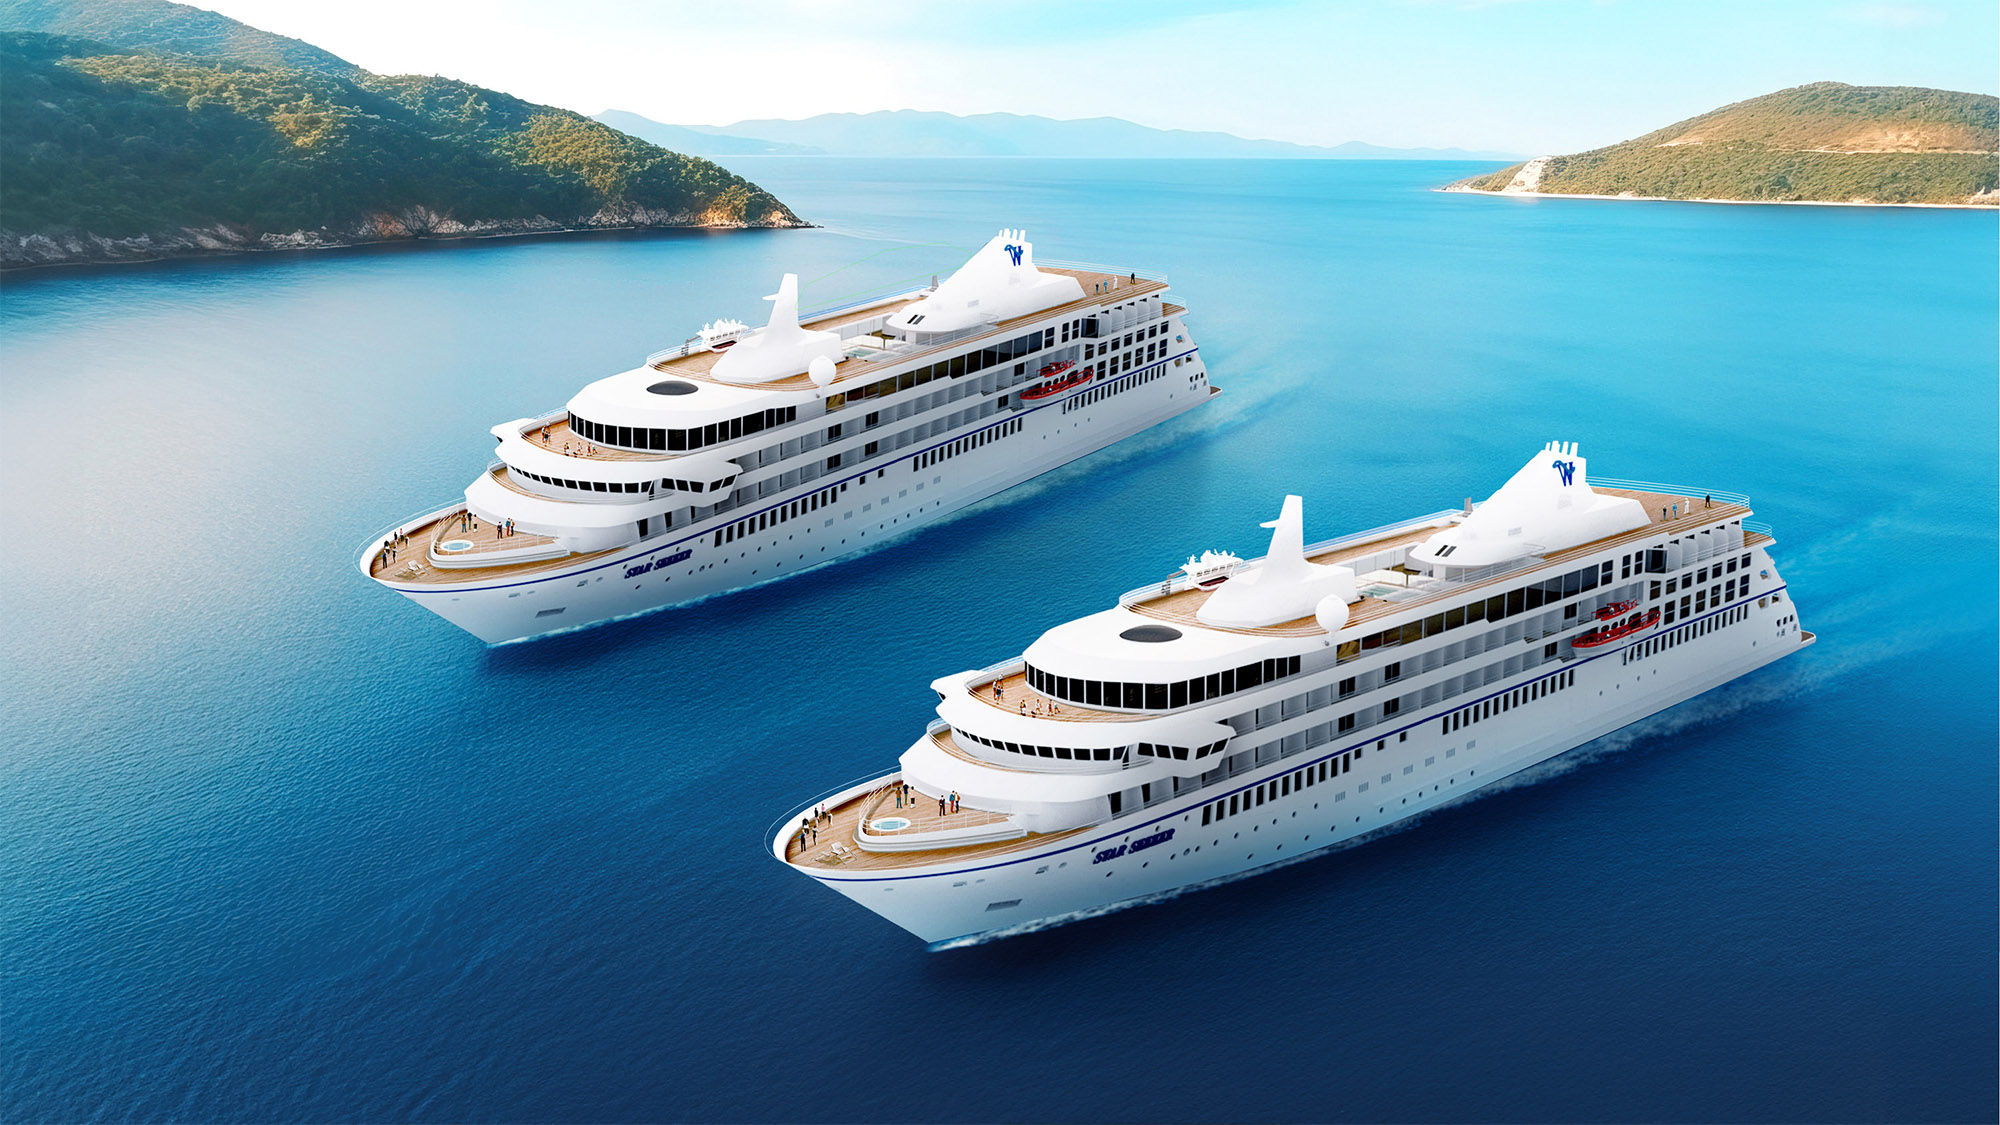 Windstar will expand its fleet with two 226-passenger ships 